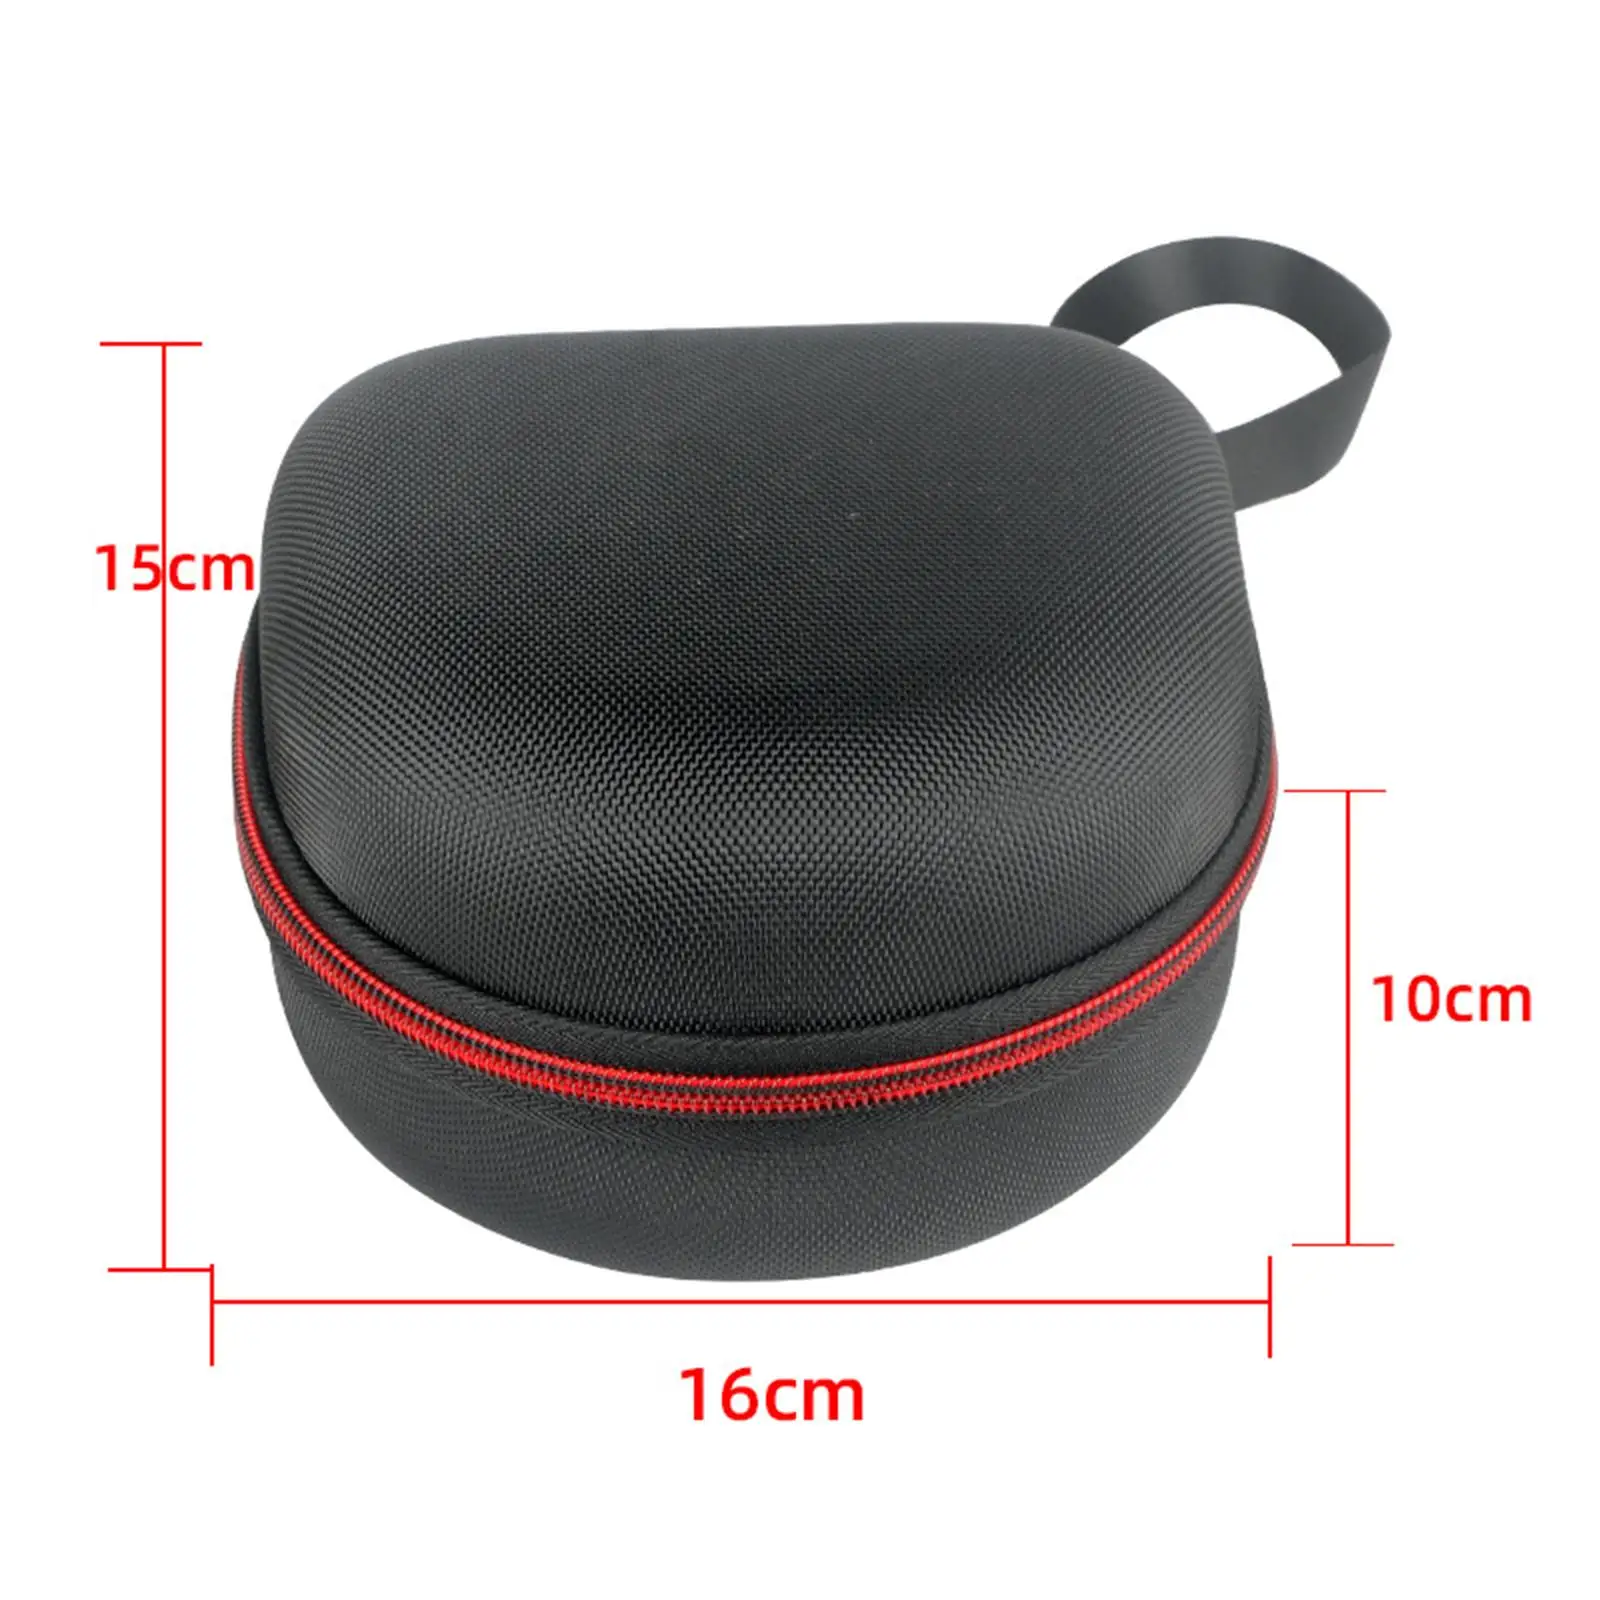 Fishing Reel Case Pouch Thickened Storage Case Baitcasting Reel Case for Drum Raft Baitcasting Reel Accessories